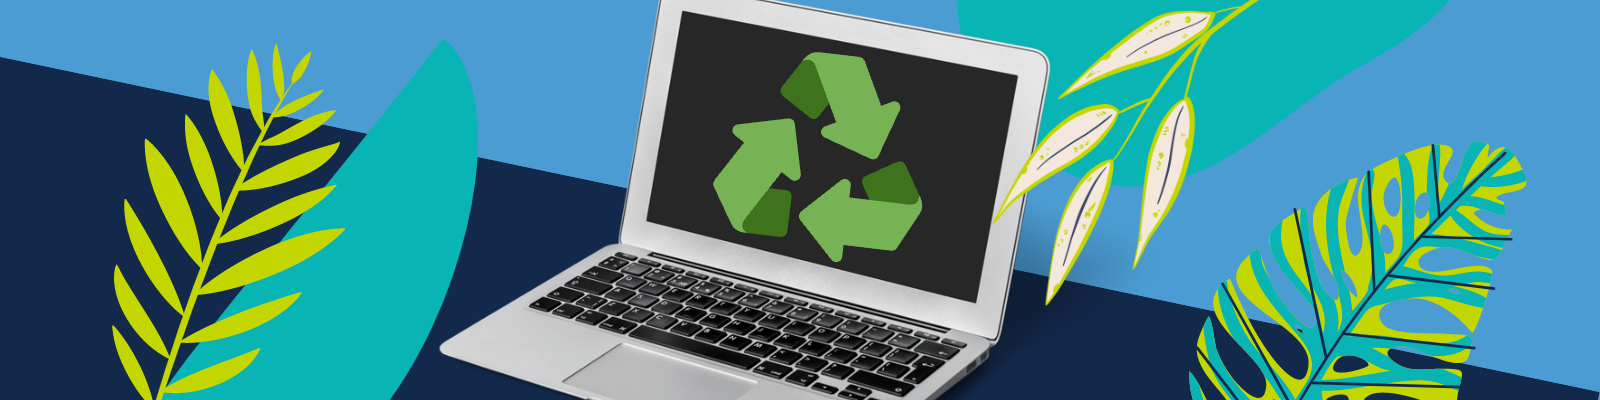 For Earth Day, a laptop computer showing a reduce, reuse, recycle symbol floats on stylized green leaves